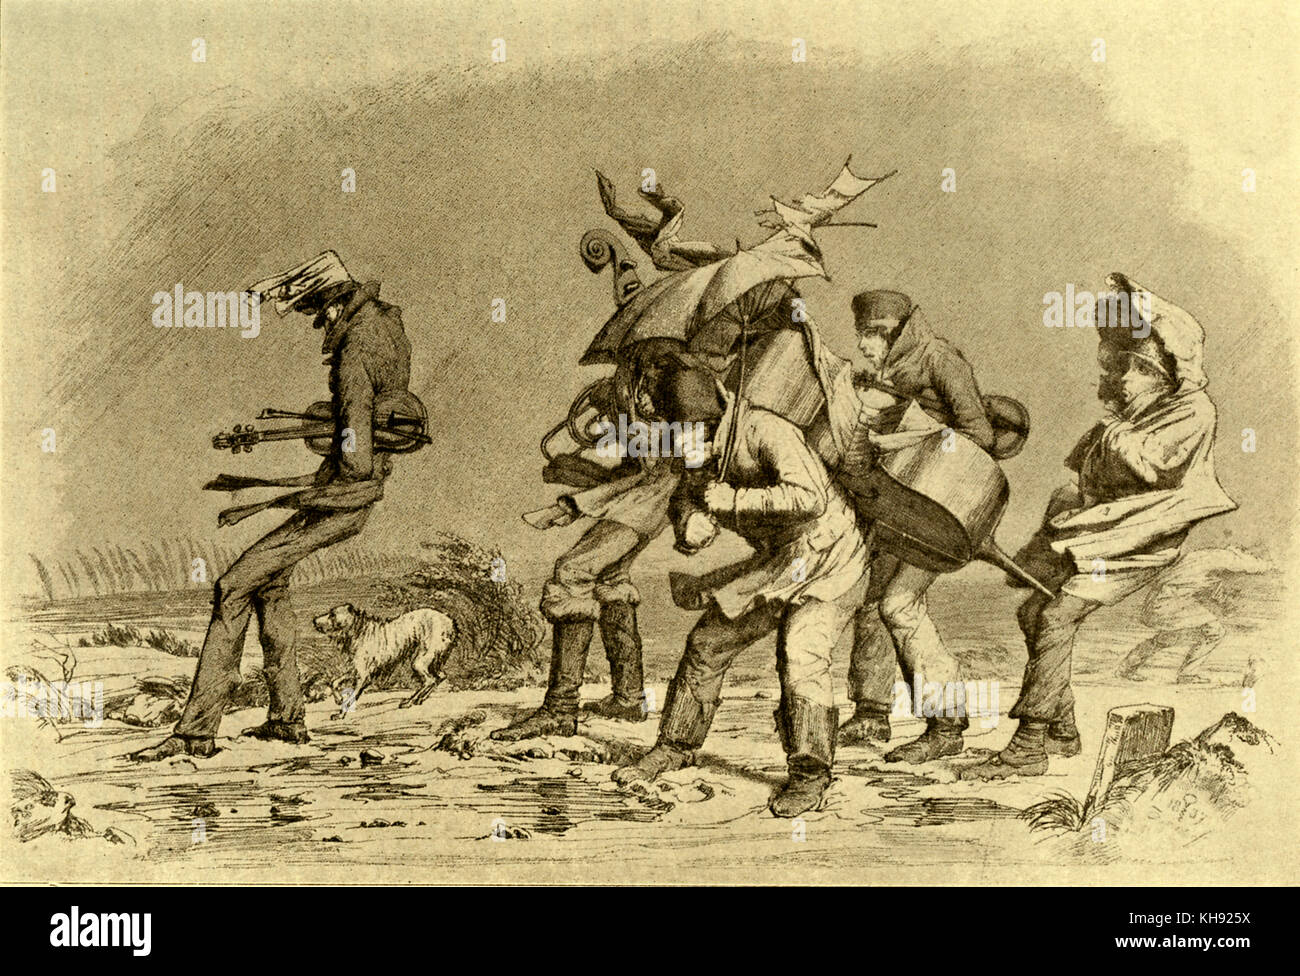 Wandering Musicians ('Wandernde Musikanten') - caricature by Schrödter, 19th century. Wandering in bad weather conditions. Stock Photo